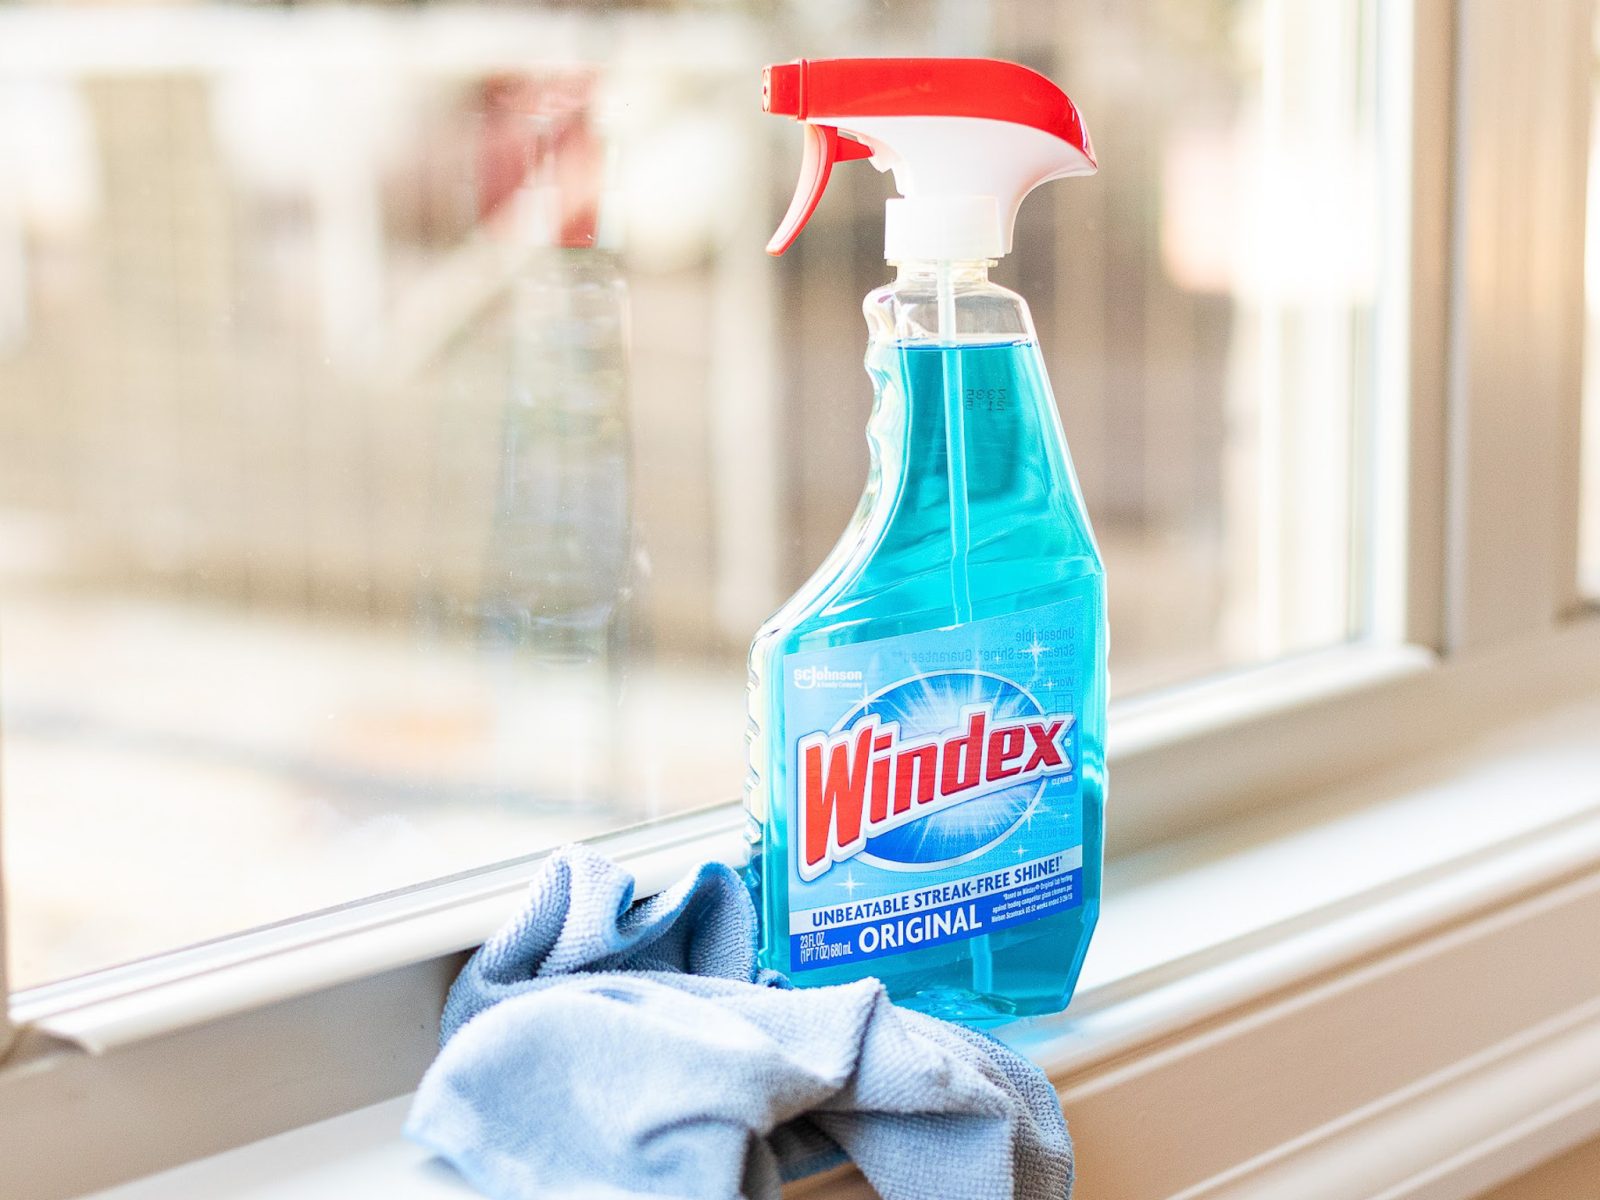 Lighten & Brighten Your Home With Windex® Glass Cleaner – Save Now At Publix